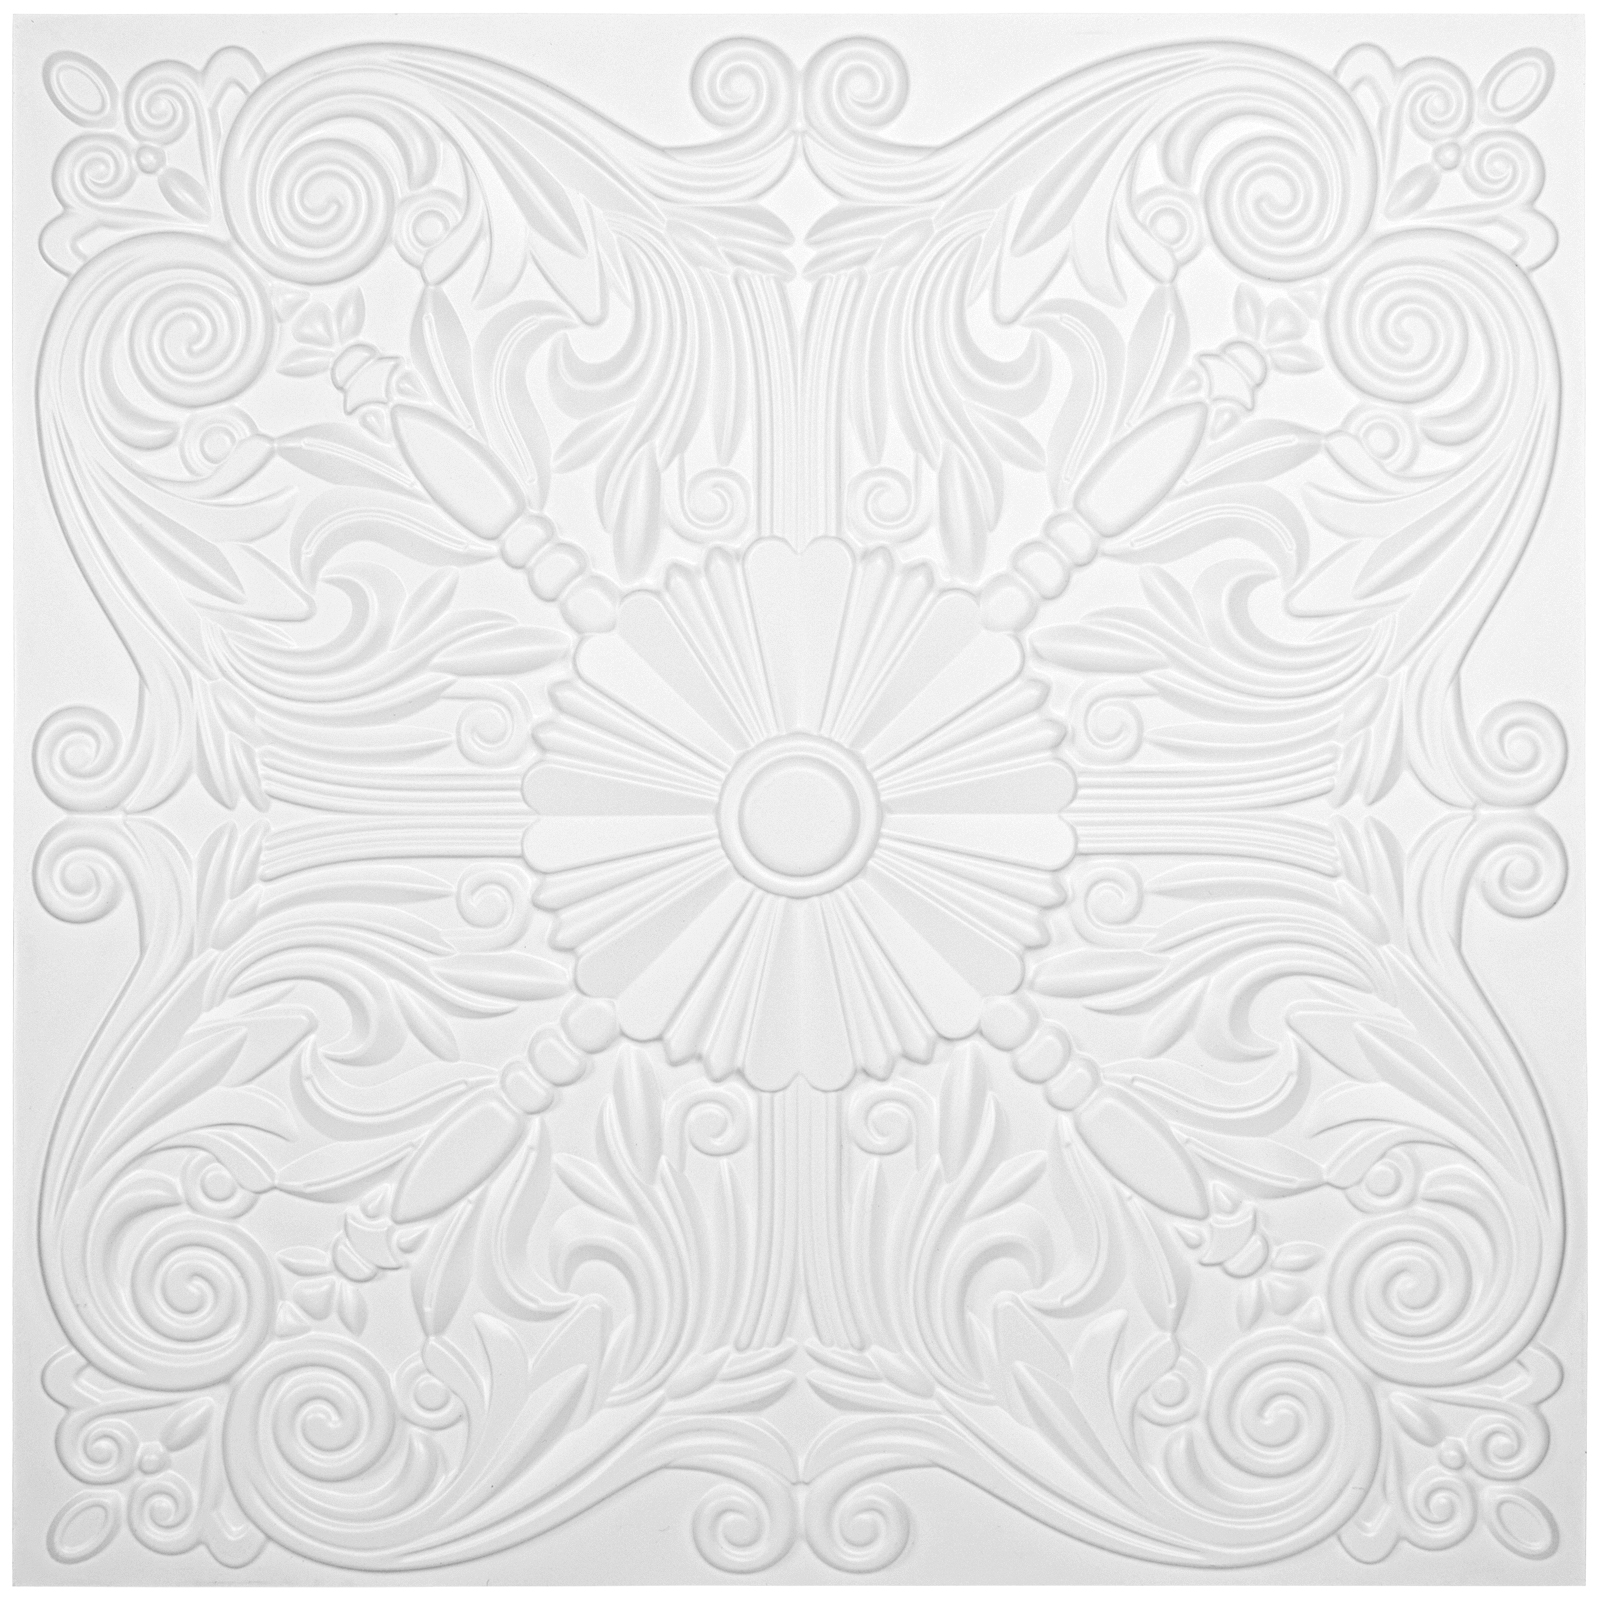 A10904P12 -Decorative Ceiling Tile 2x2 Glue up, Lay in Ceiling Tile 24x24 Pack of 12pcs Spanish Floral in Matt White